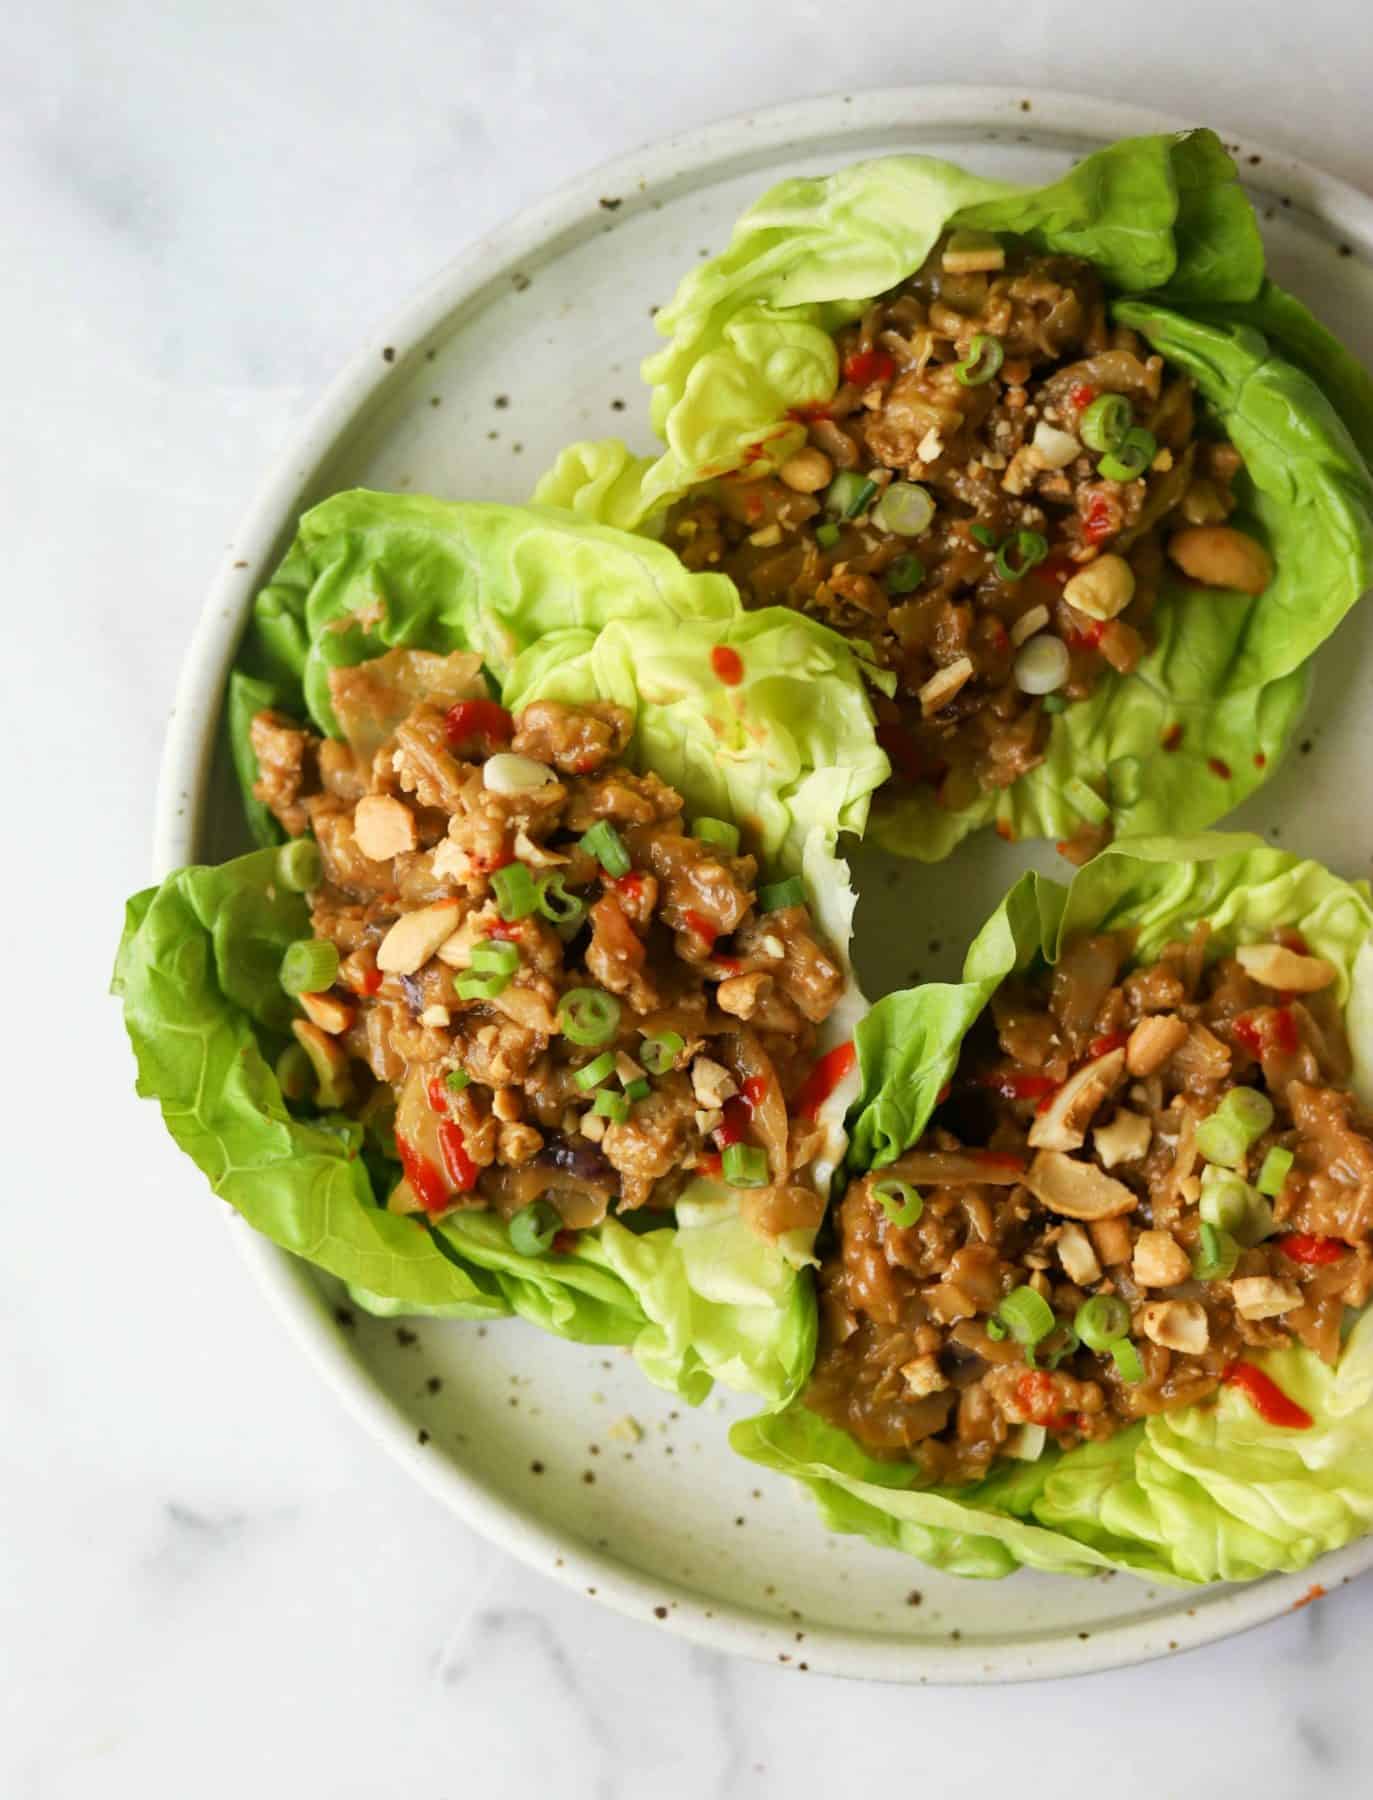 Cashew chicken lettuce wraps on a white speckled plate as an example for ways to eat more leafy greens. 